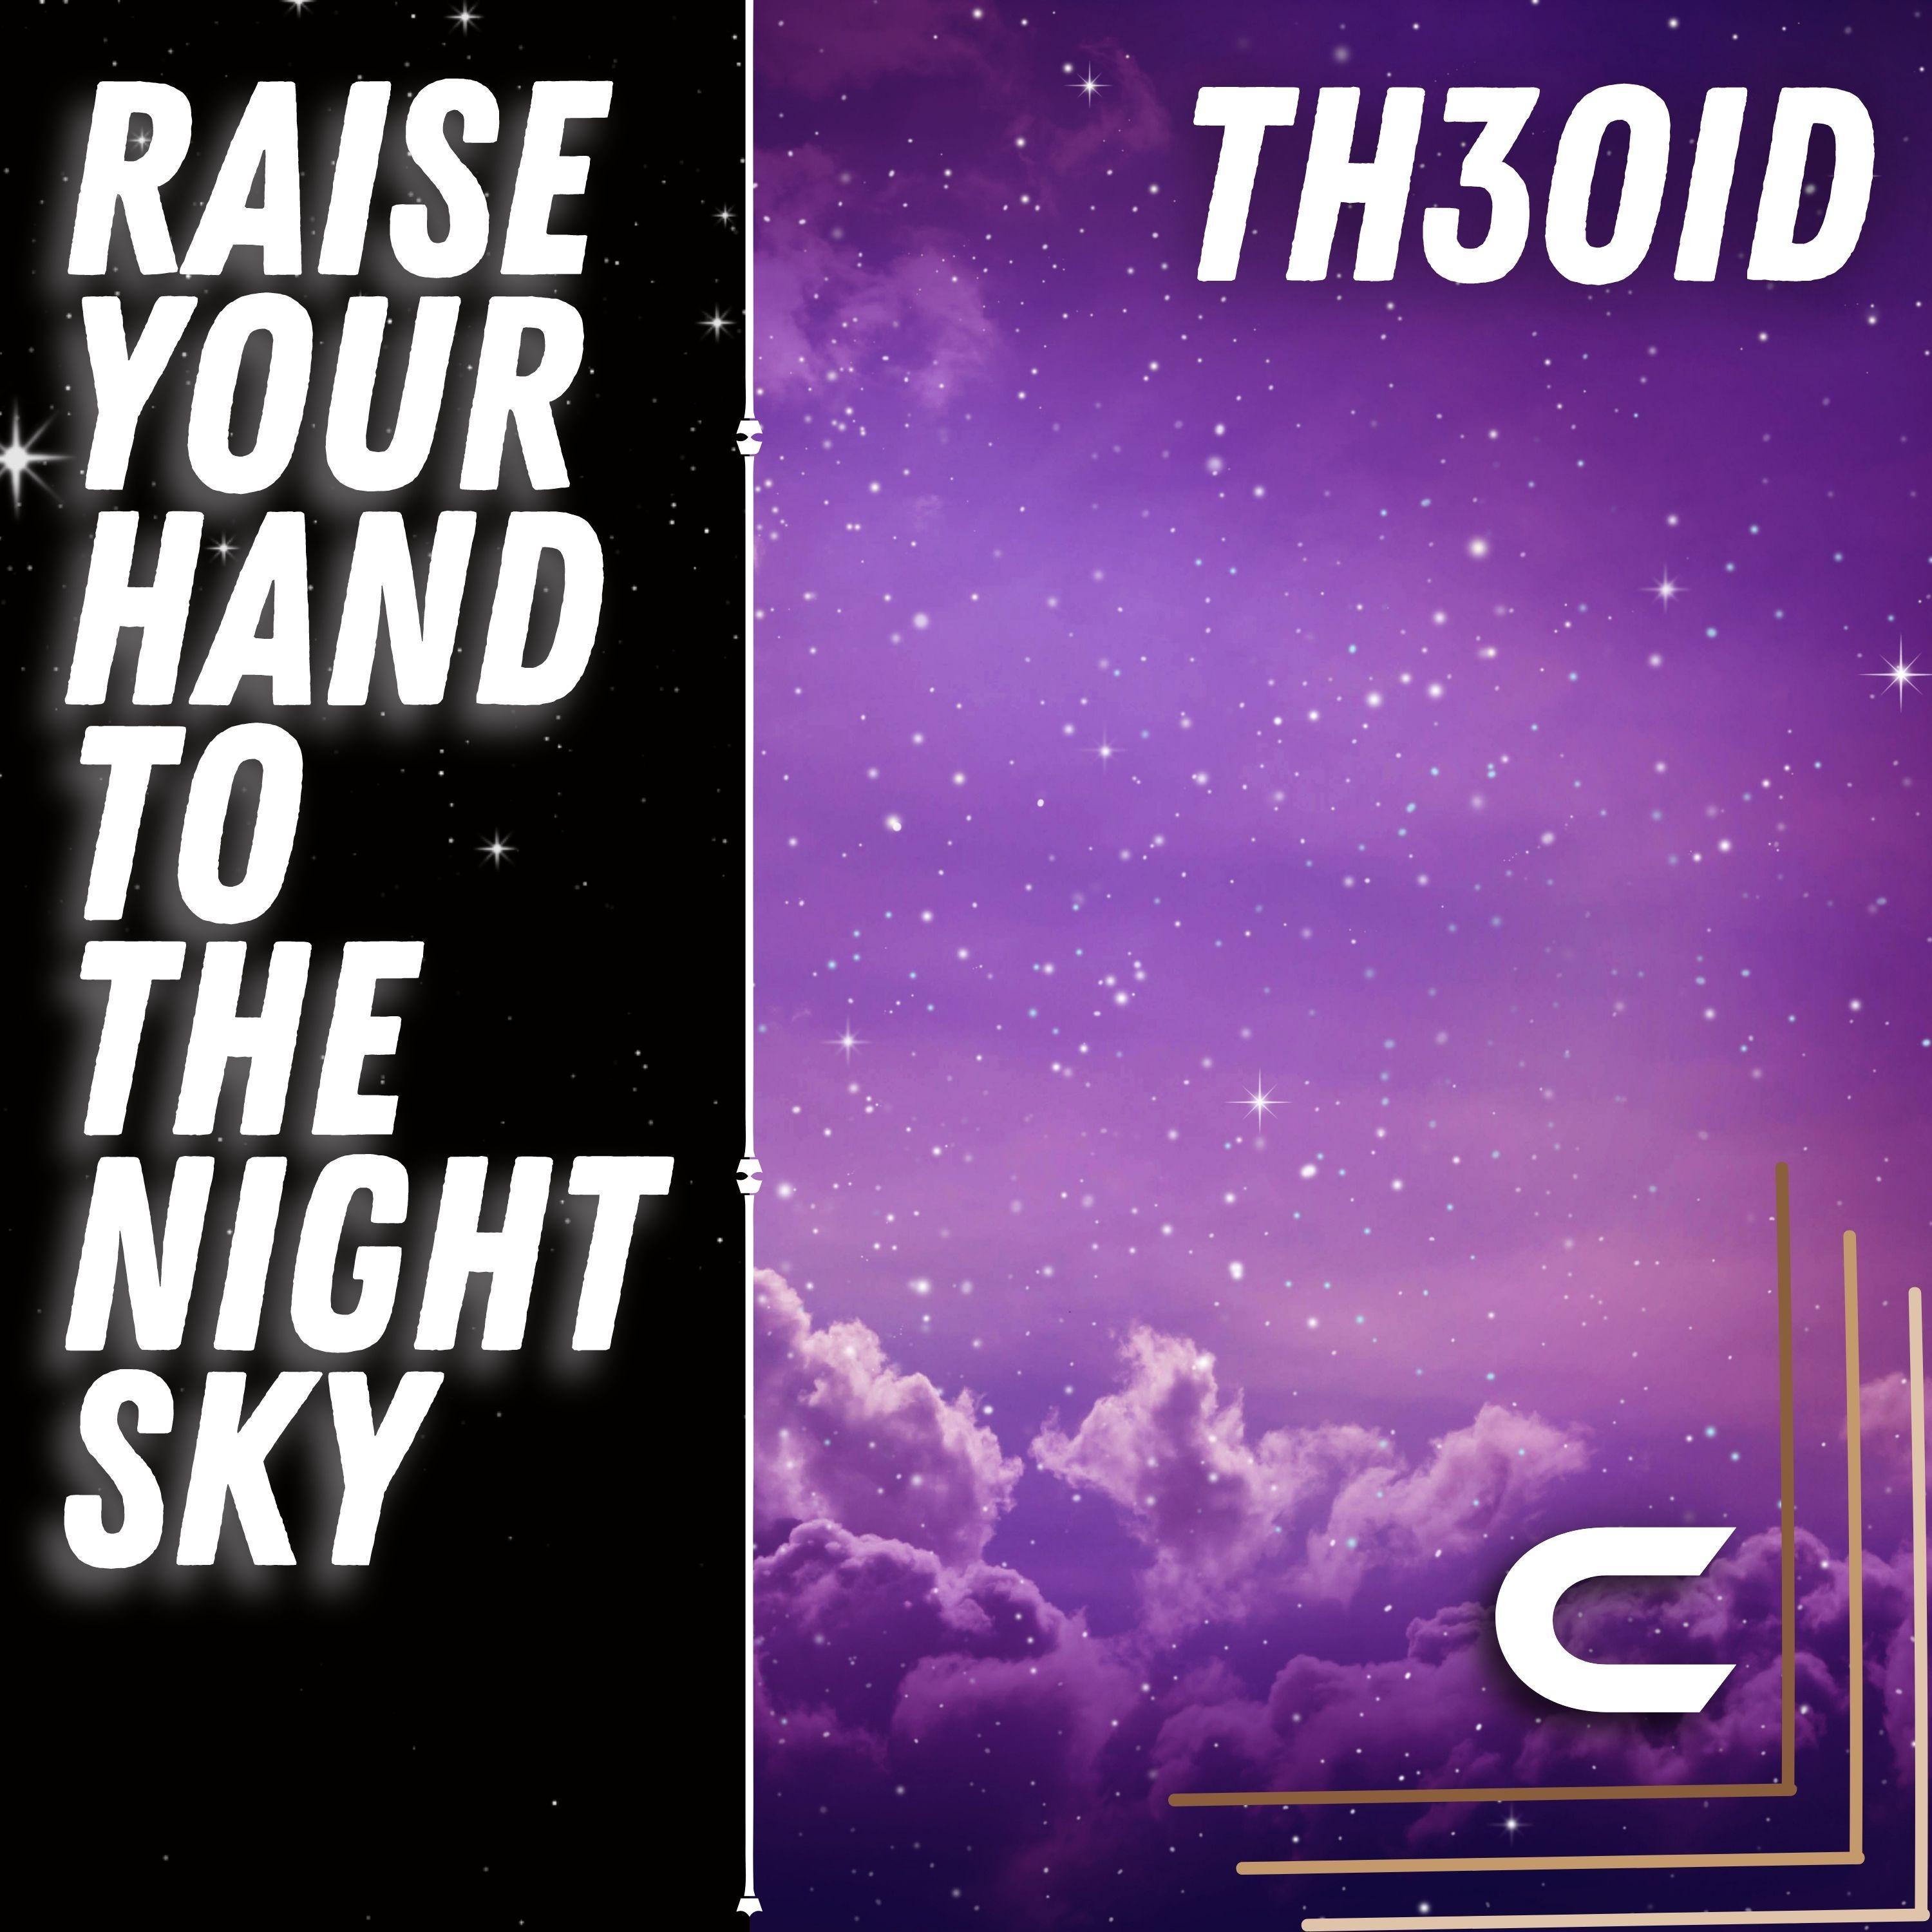 Th3oid - Raise Your Hand To The Sky